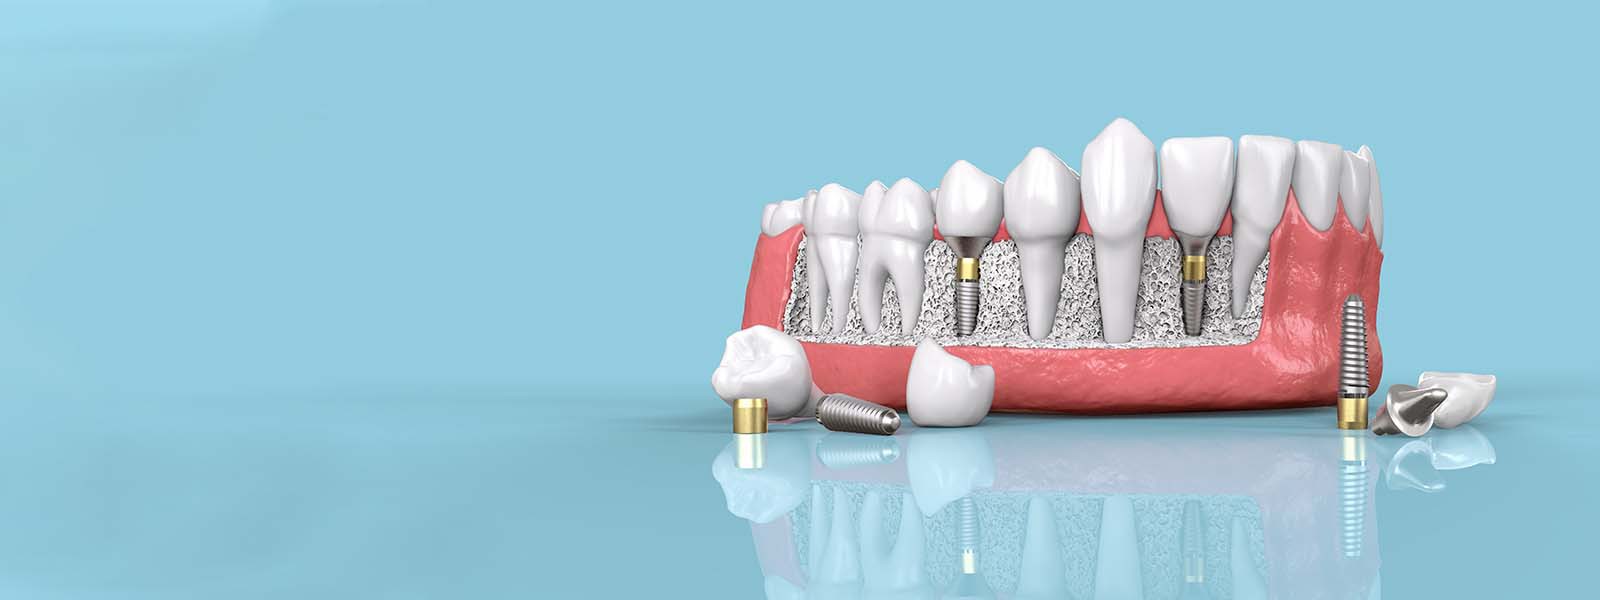 We are the #1 rated provider of a wide range of oral health care services in Manhattan 
View More